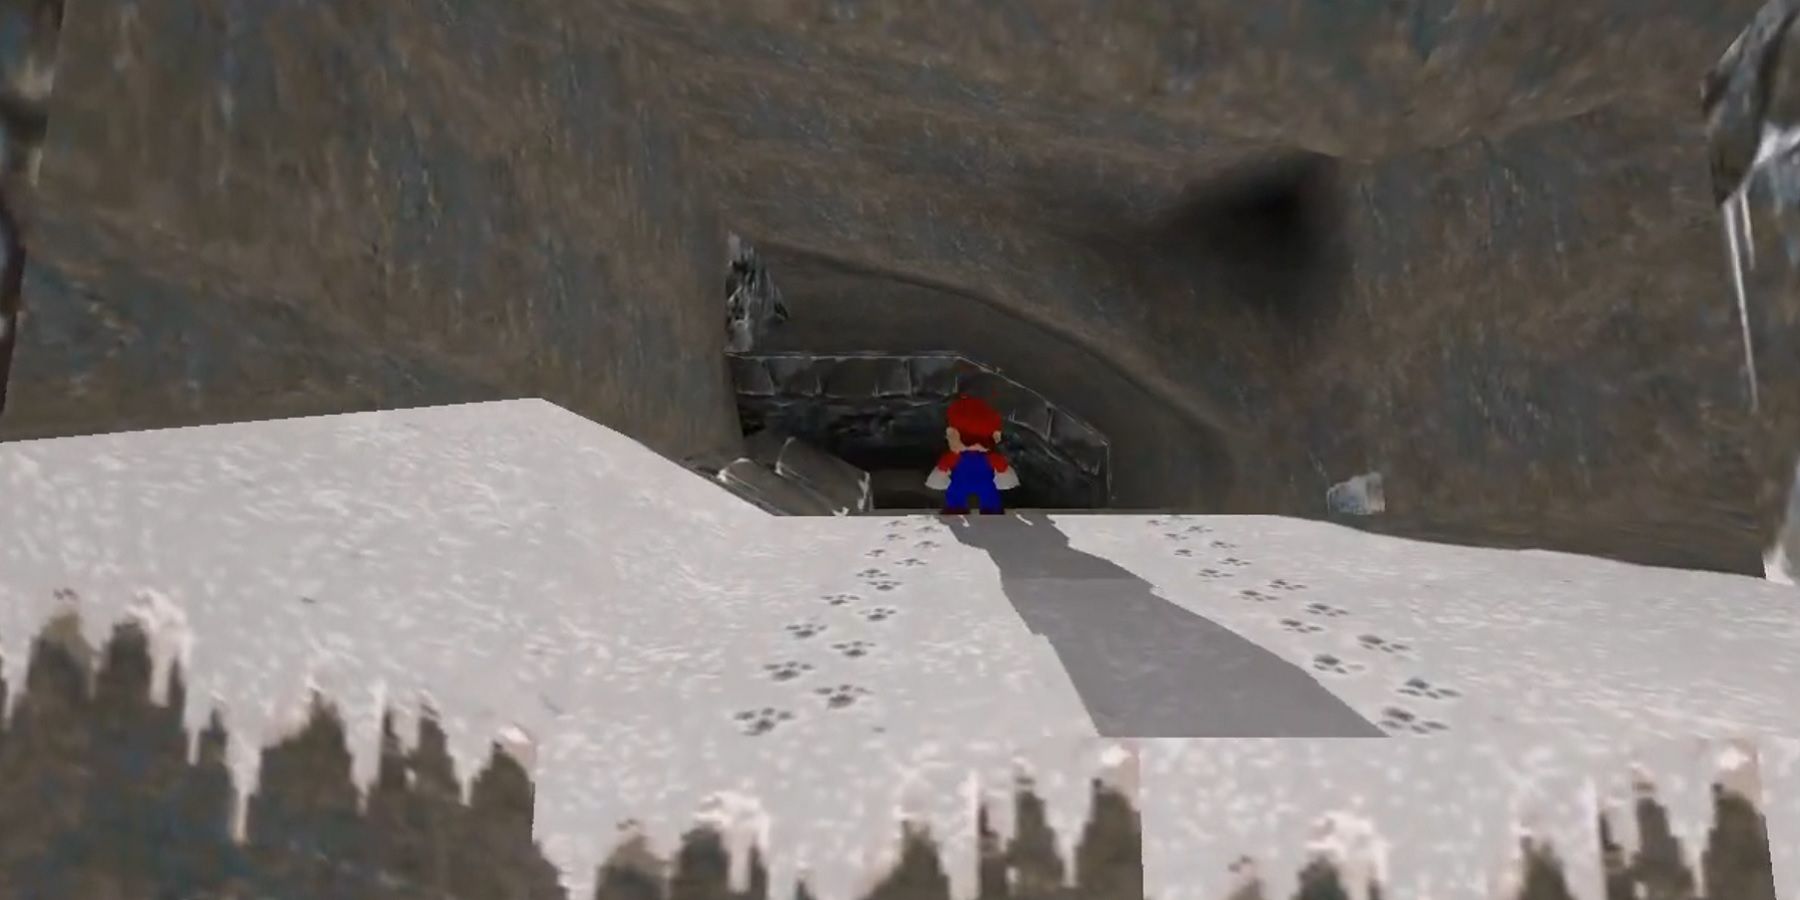 Screenshot from the original Tomb Raider game showing Mario entering a cave.